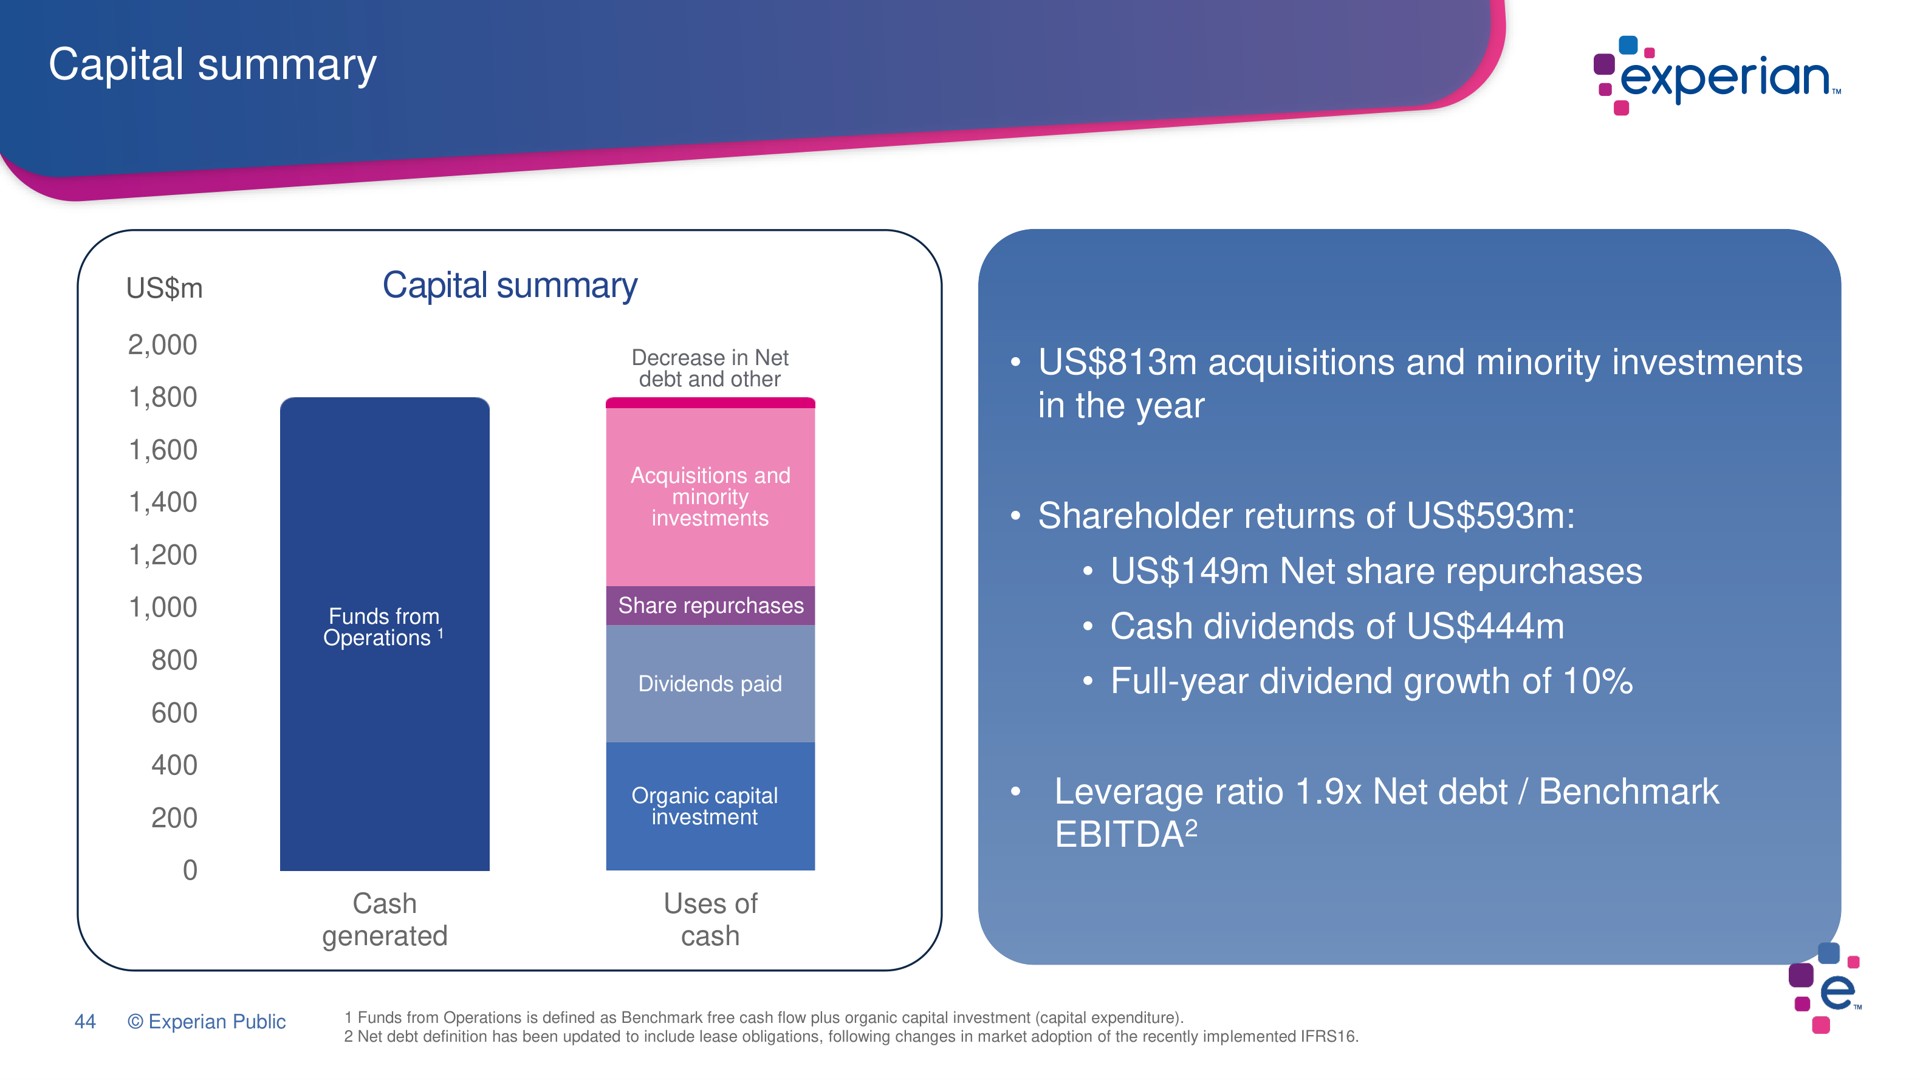 capital summary capital summary us acquisitions and minority investments in the year shareholder returns of us us net share repurchases cash dividends of us full year dividend growth of leverage ratio net debt are a gout | Experian